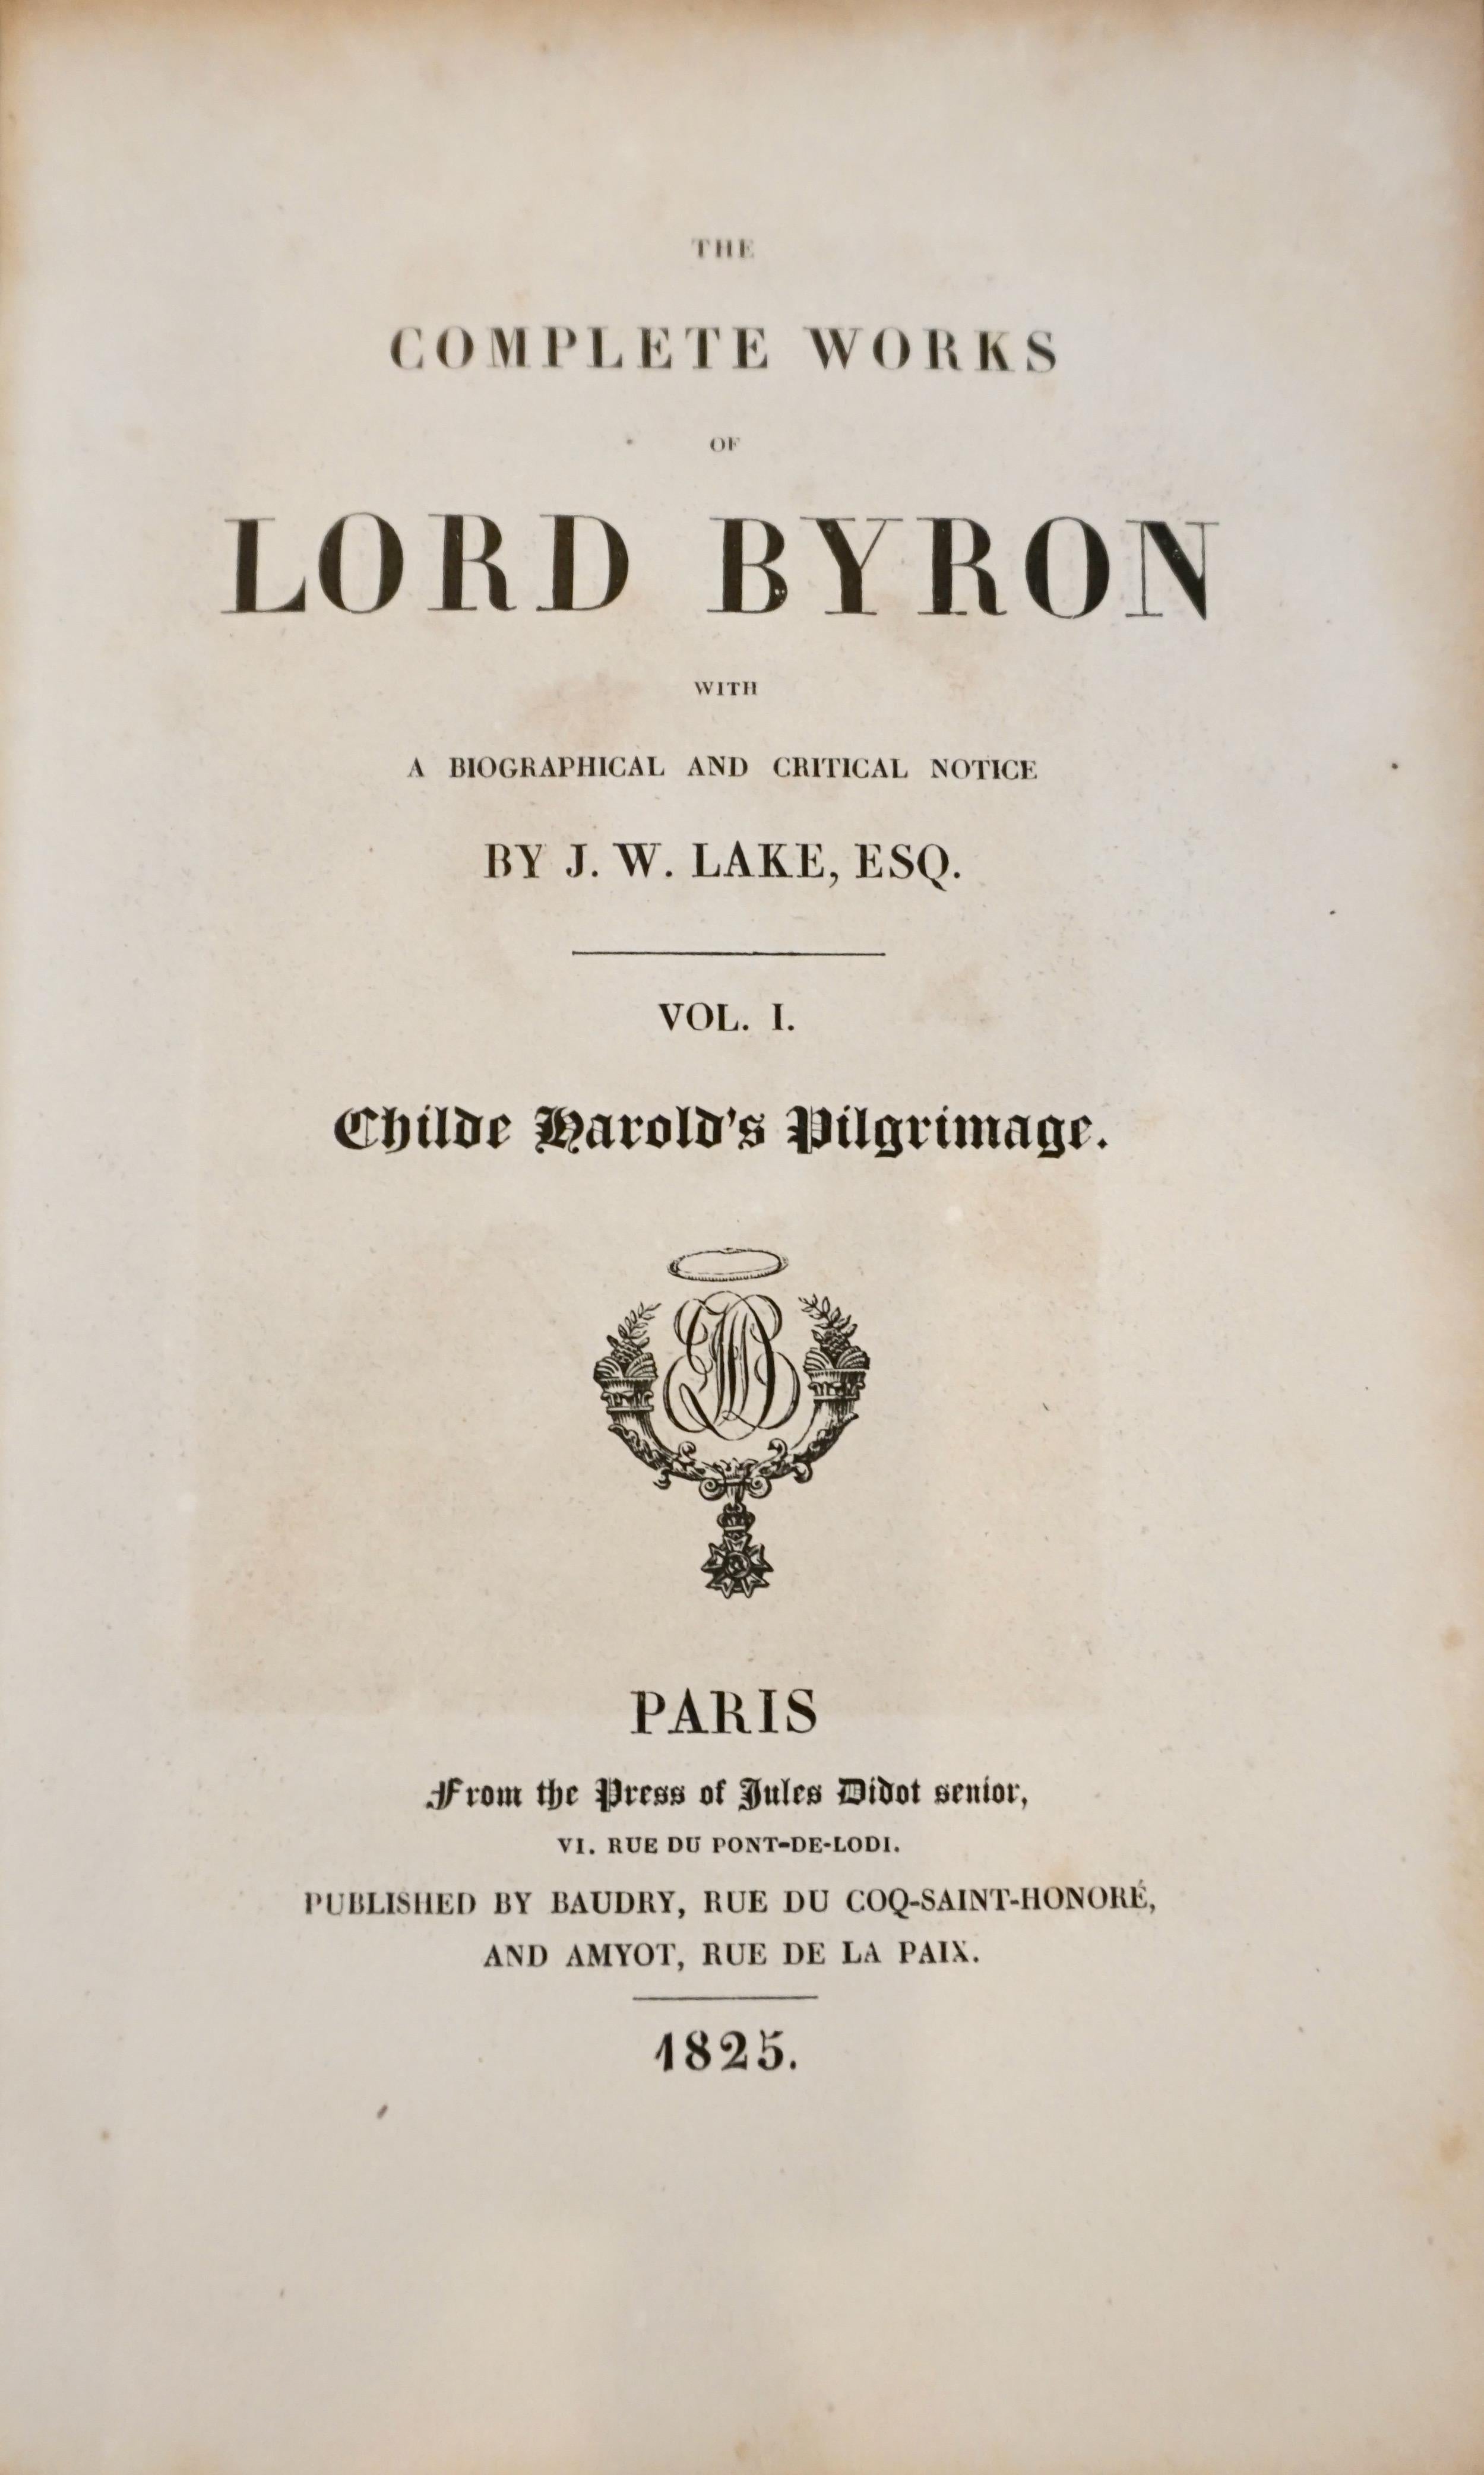 The Works of Lord Byron Bound in Green Morocco Leather with Gilt Tooling 1